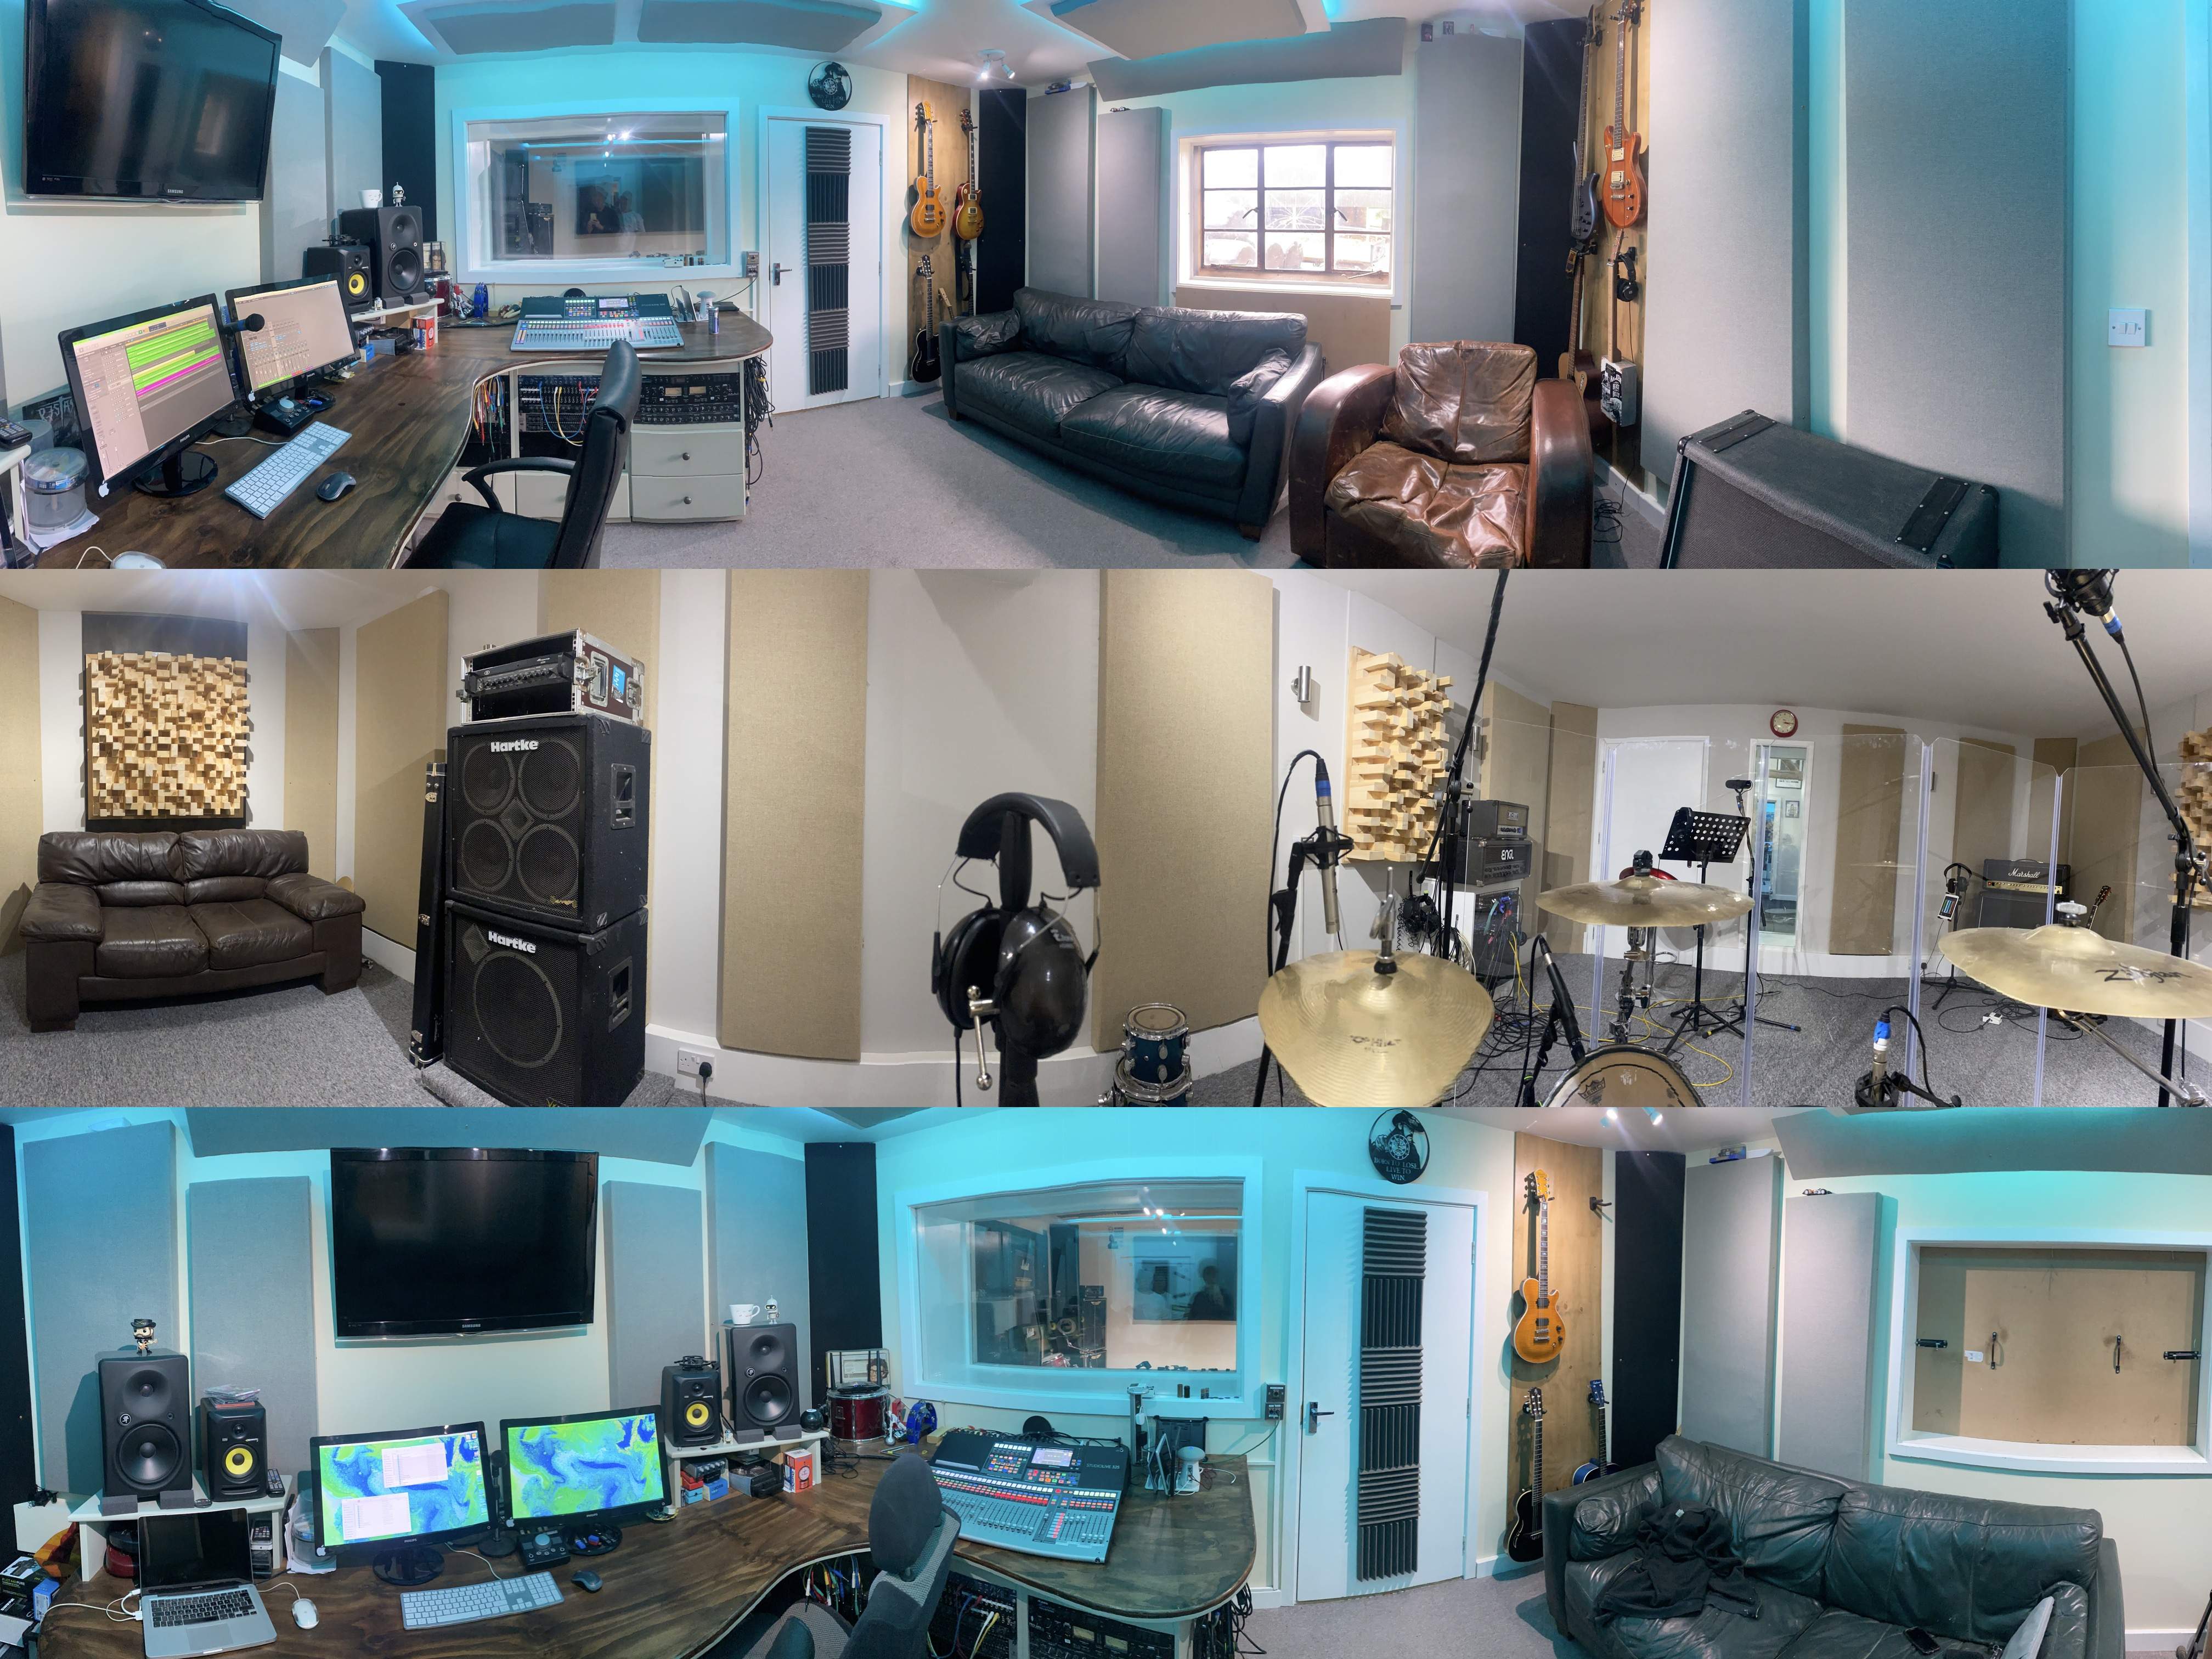 Pano shots of our 2 main rooms, including a peek into the tracking room above the console.